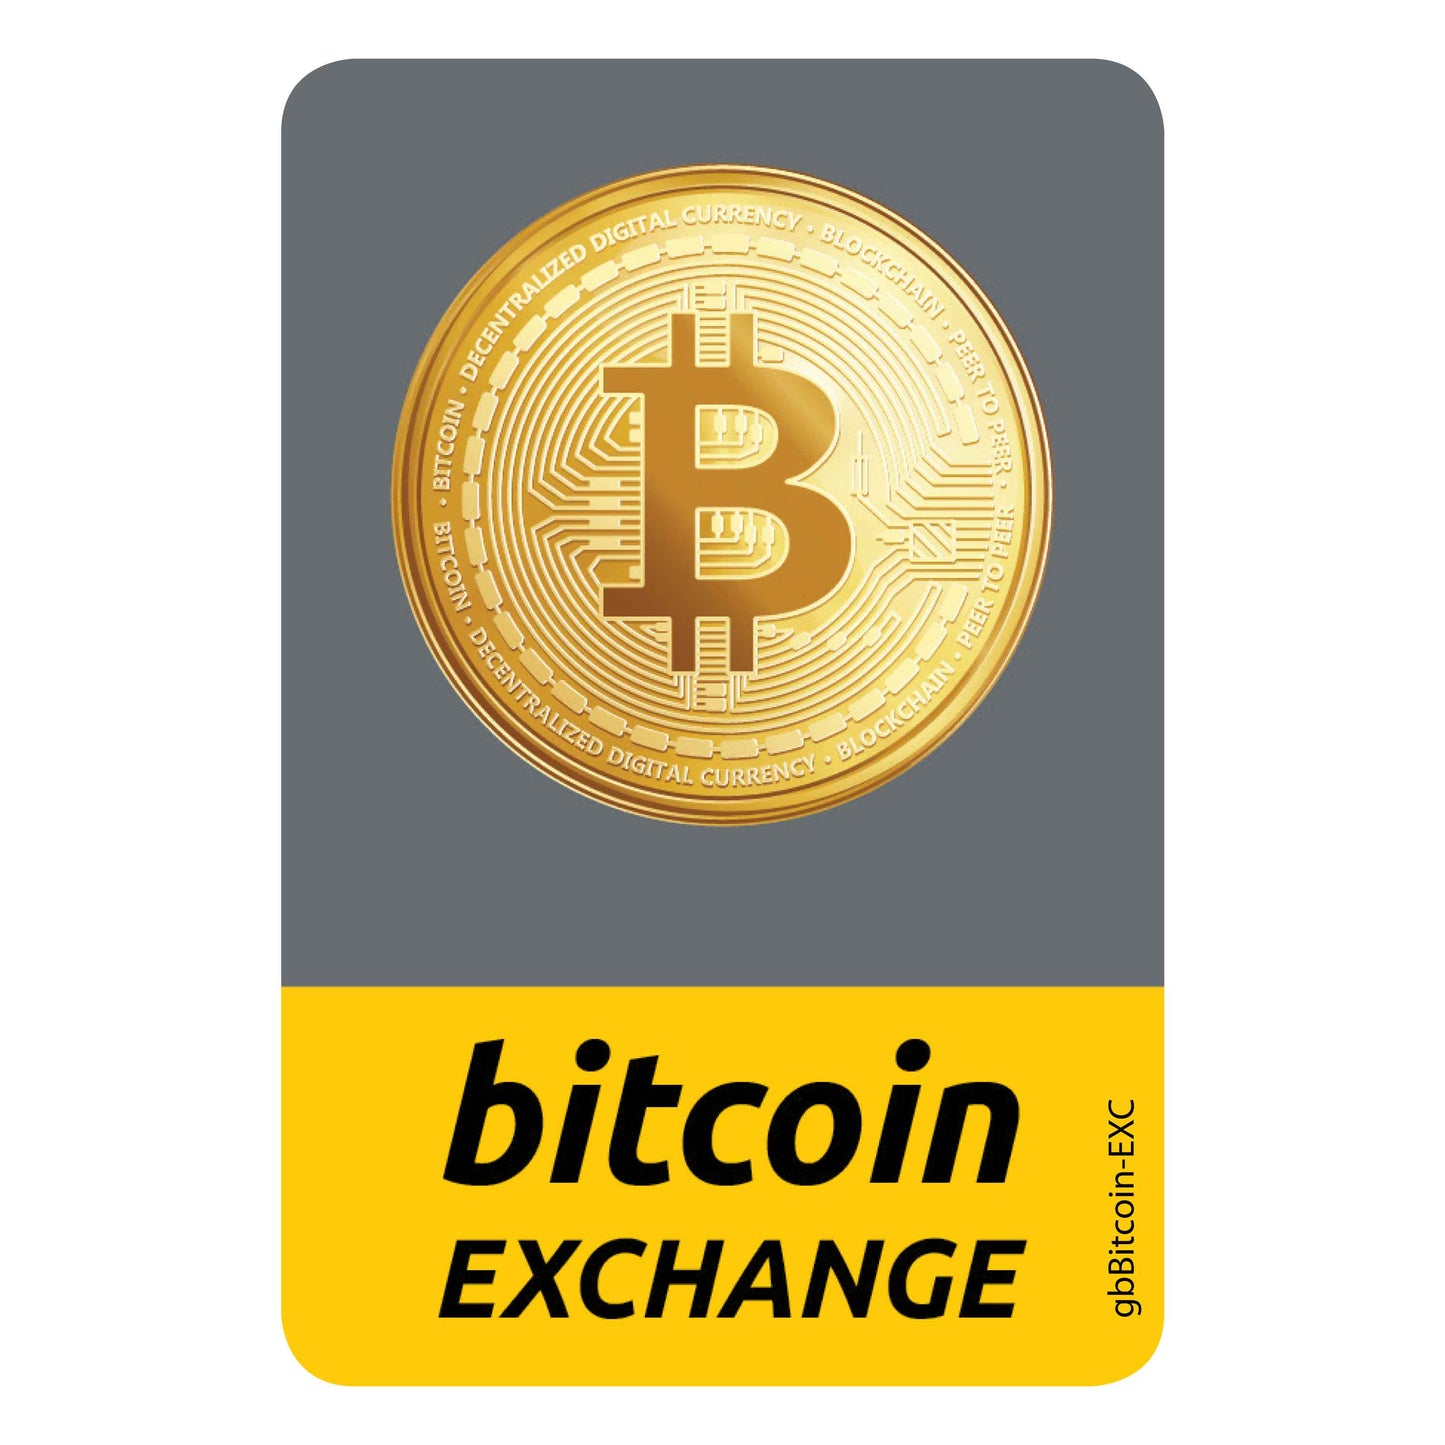 Bitcoin Exchange Decal. 2 inches by 3 inches in size.